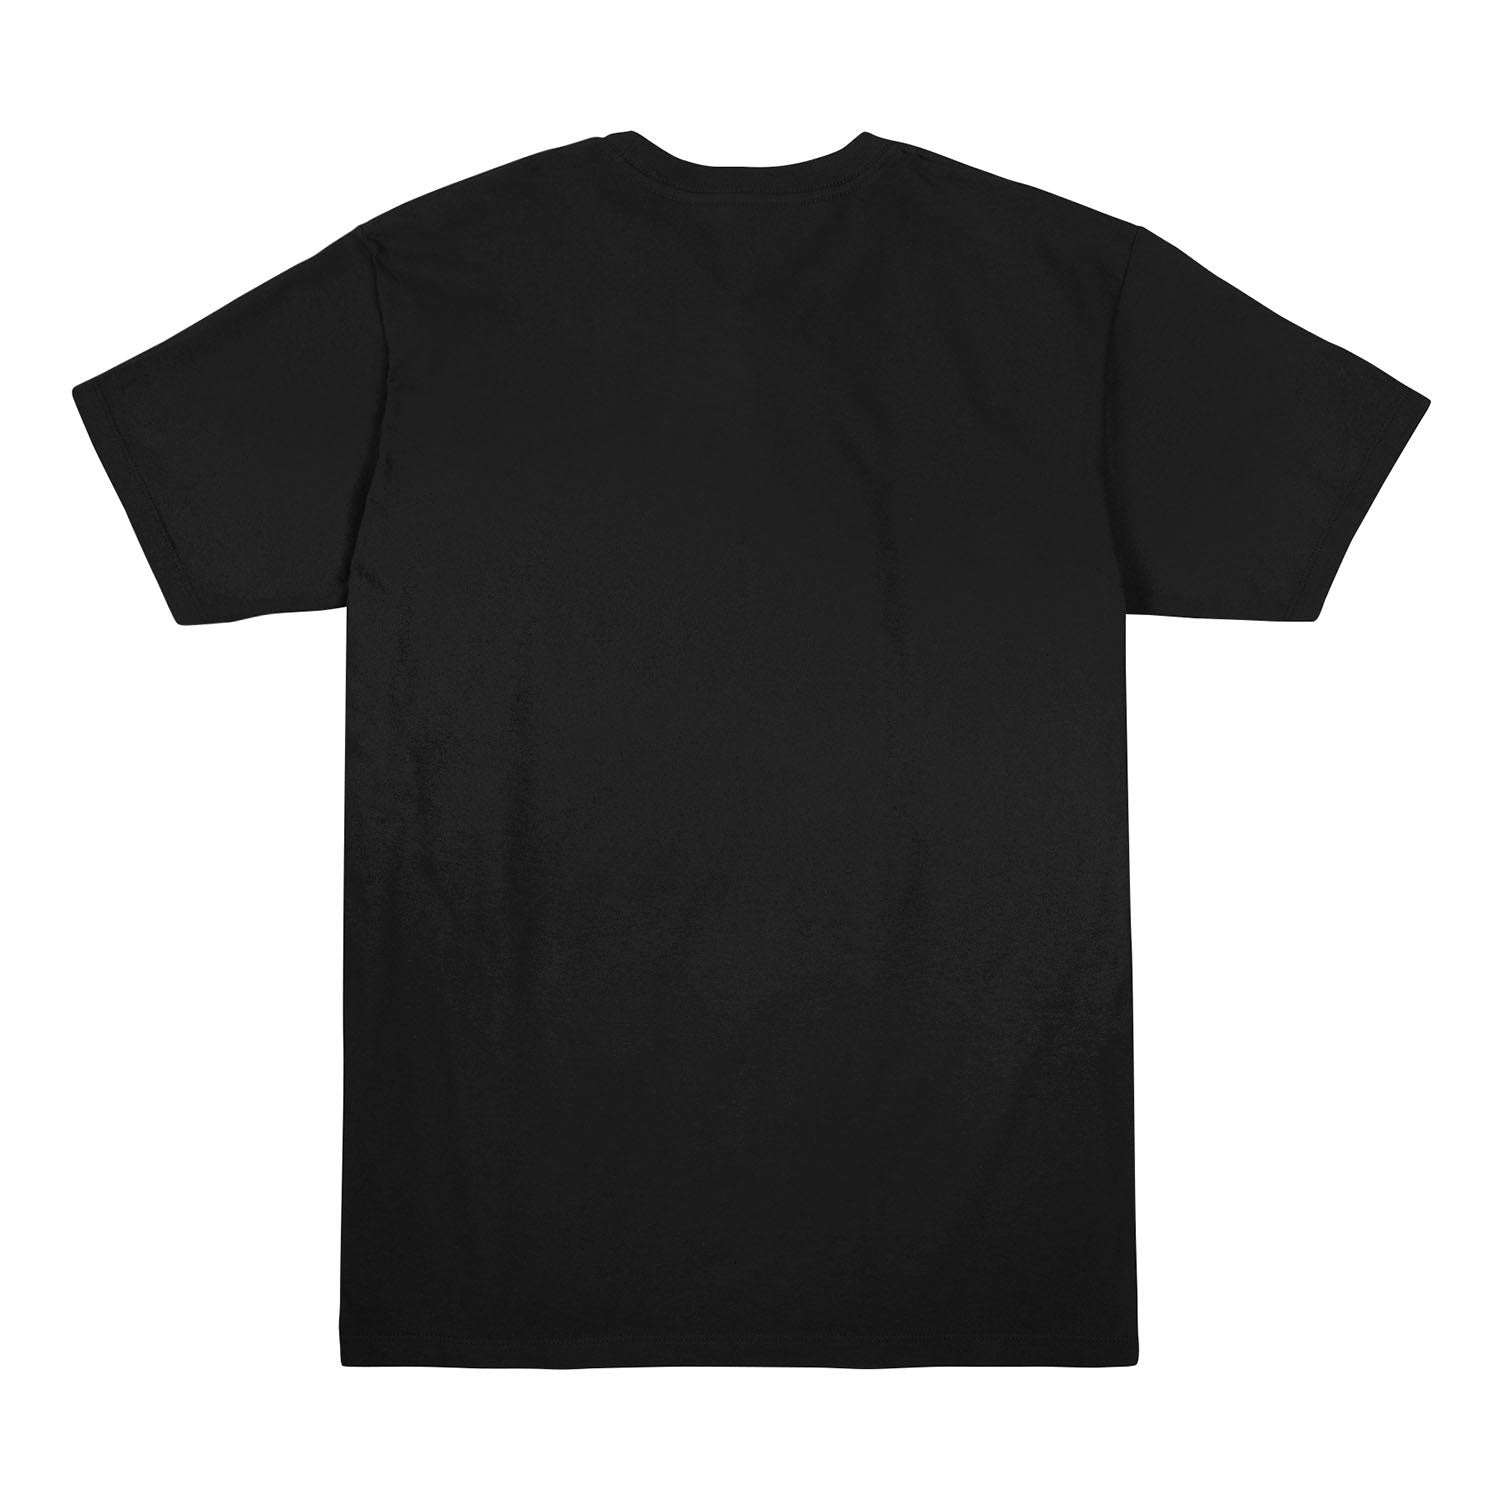 Call of Duty The Gulag Black T-Shirt - Back View